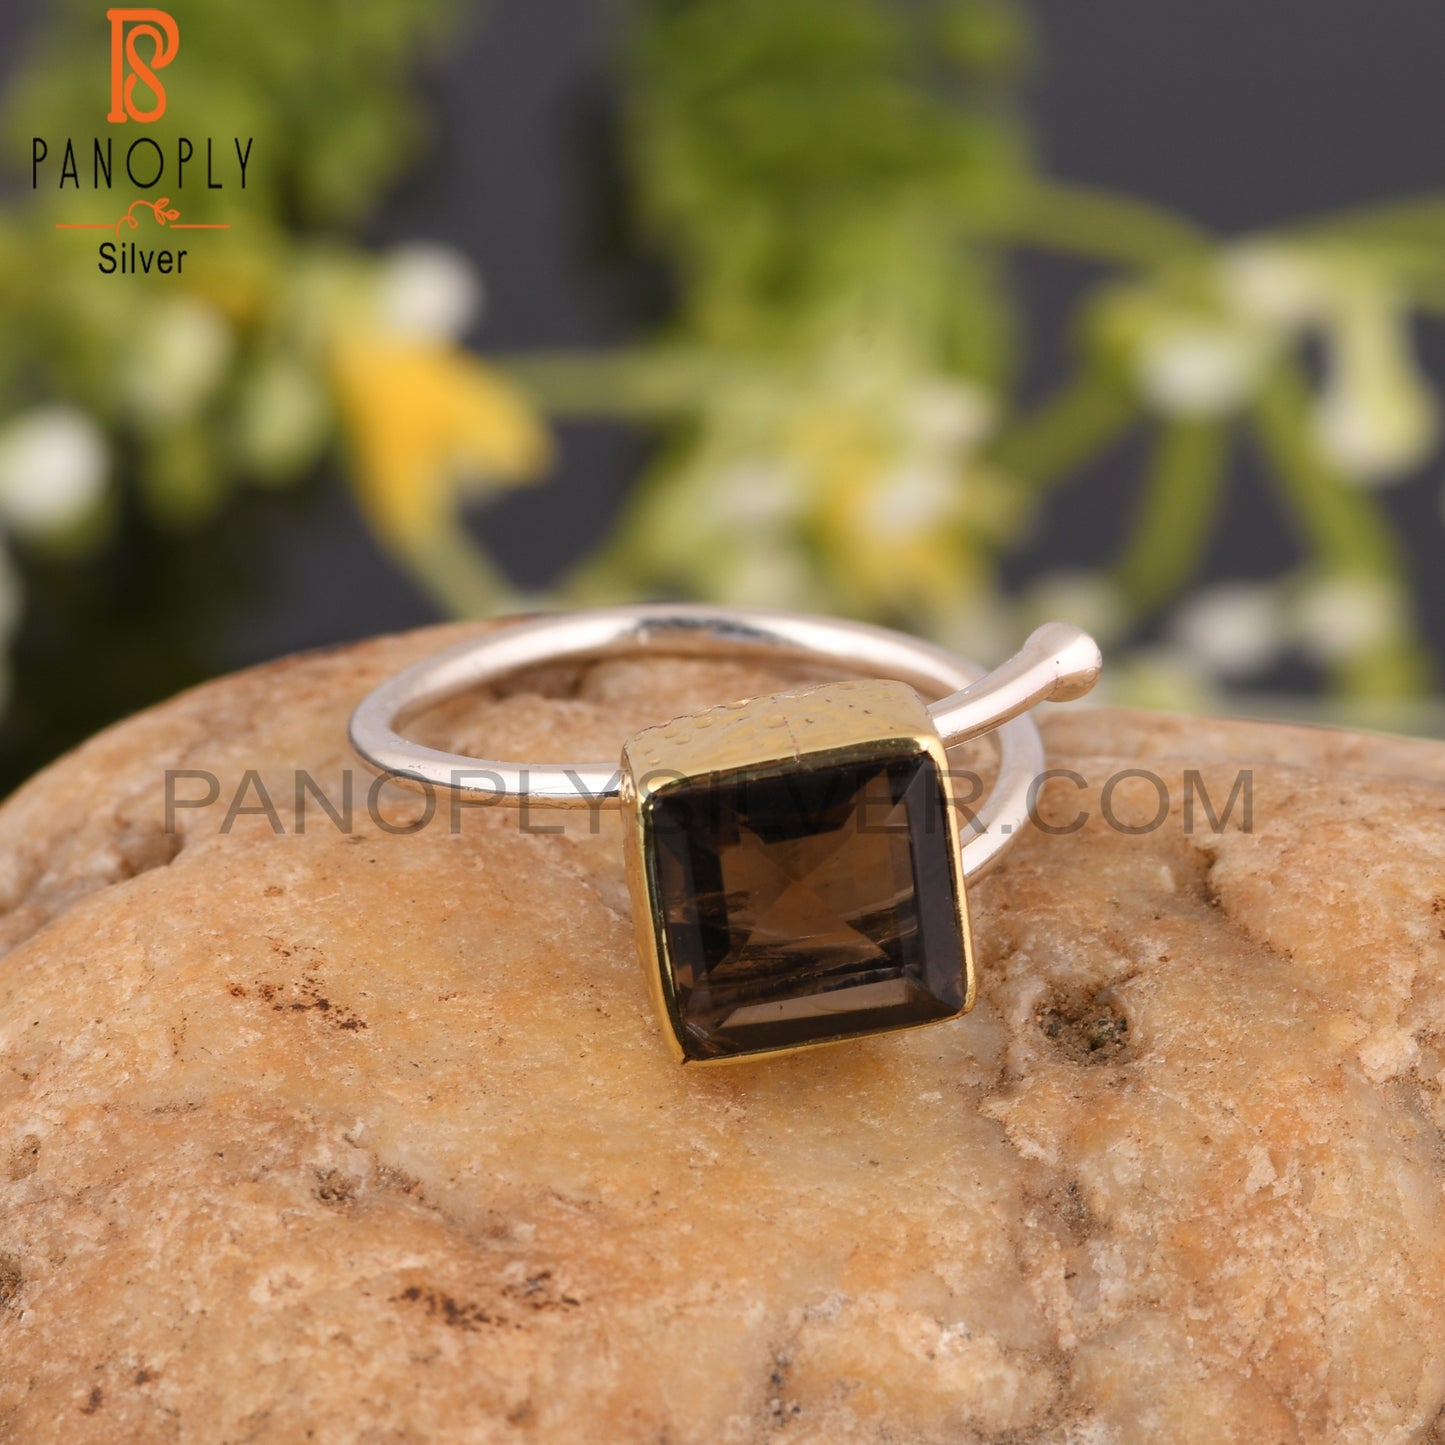 Smoky Square 925 Sterling Silver Beautiful Ring